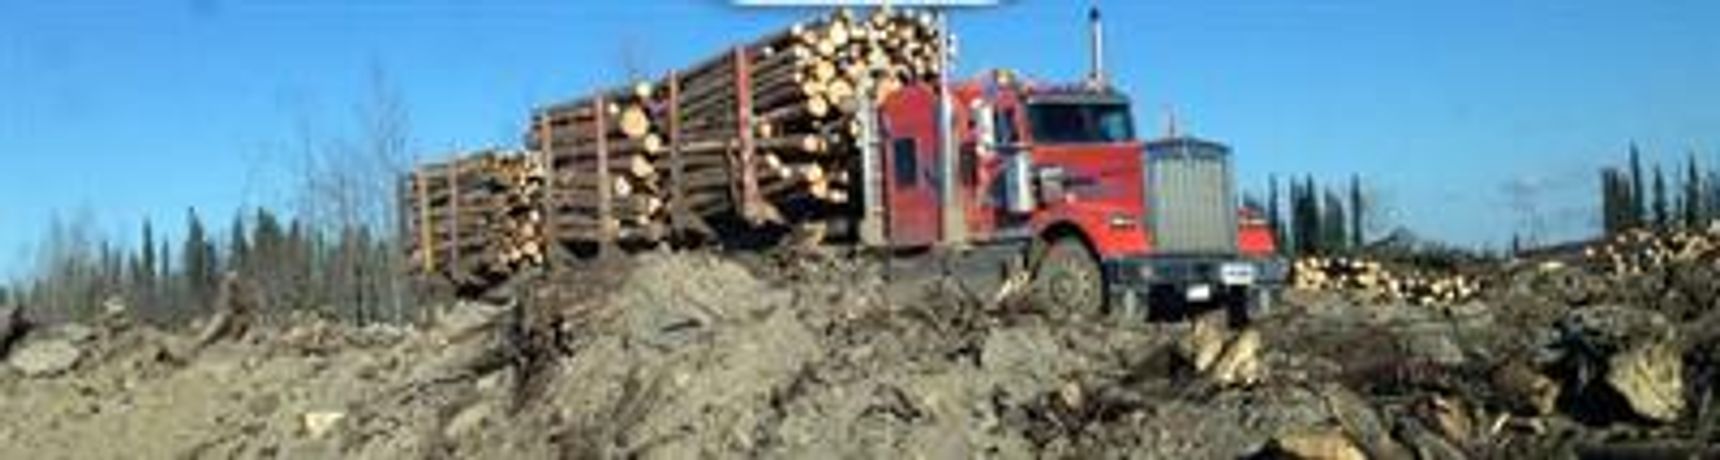 Super - Model B - Logger Forestry Trailers